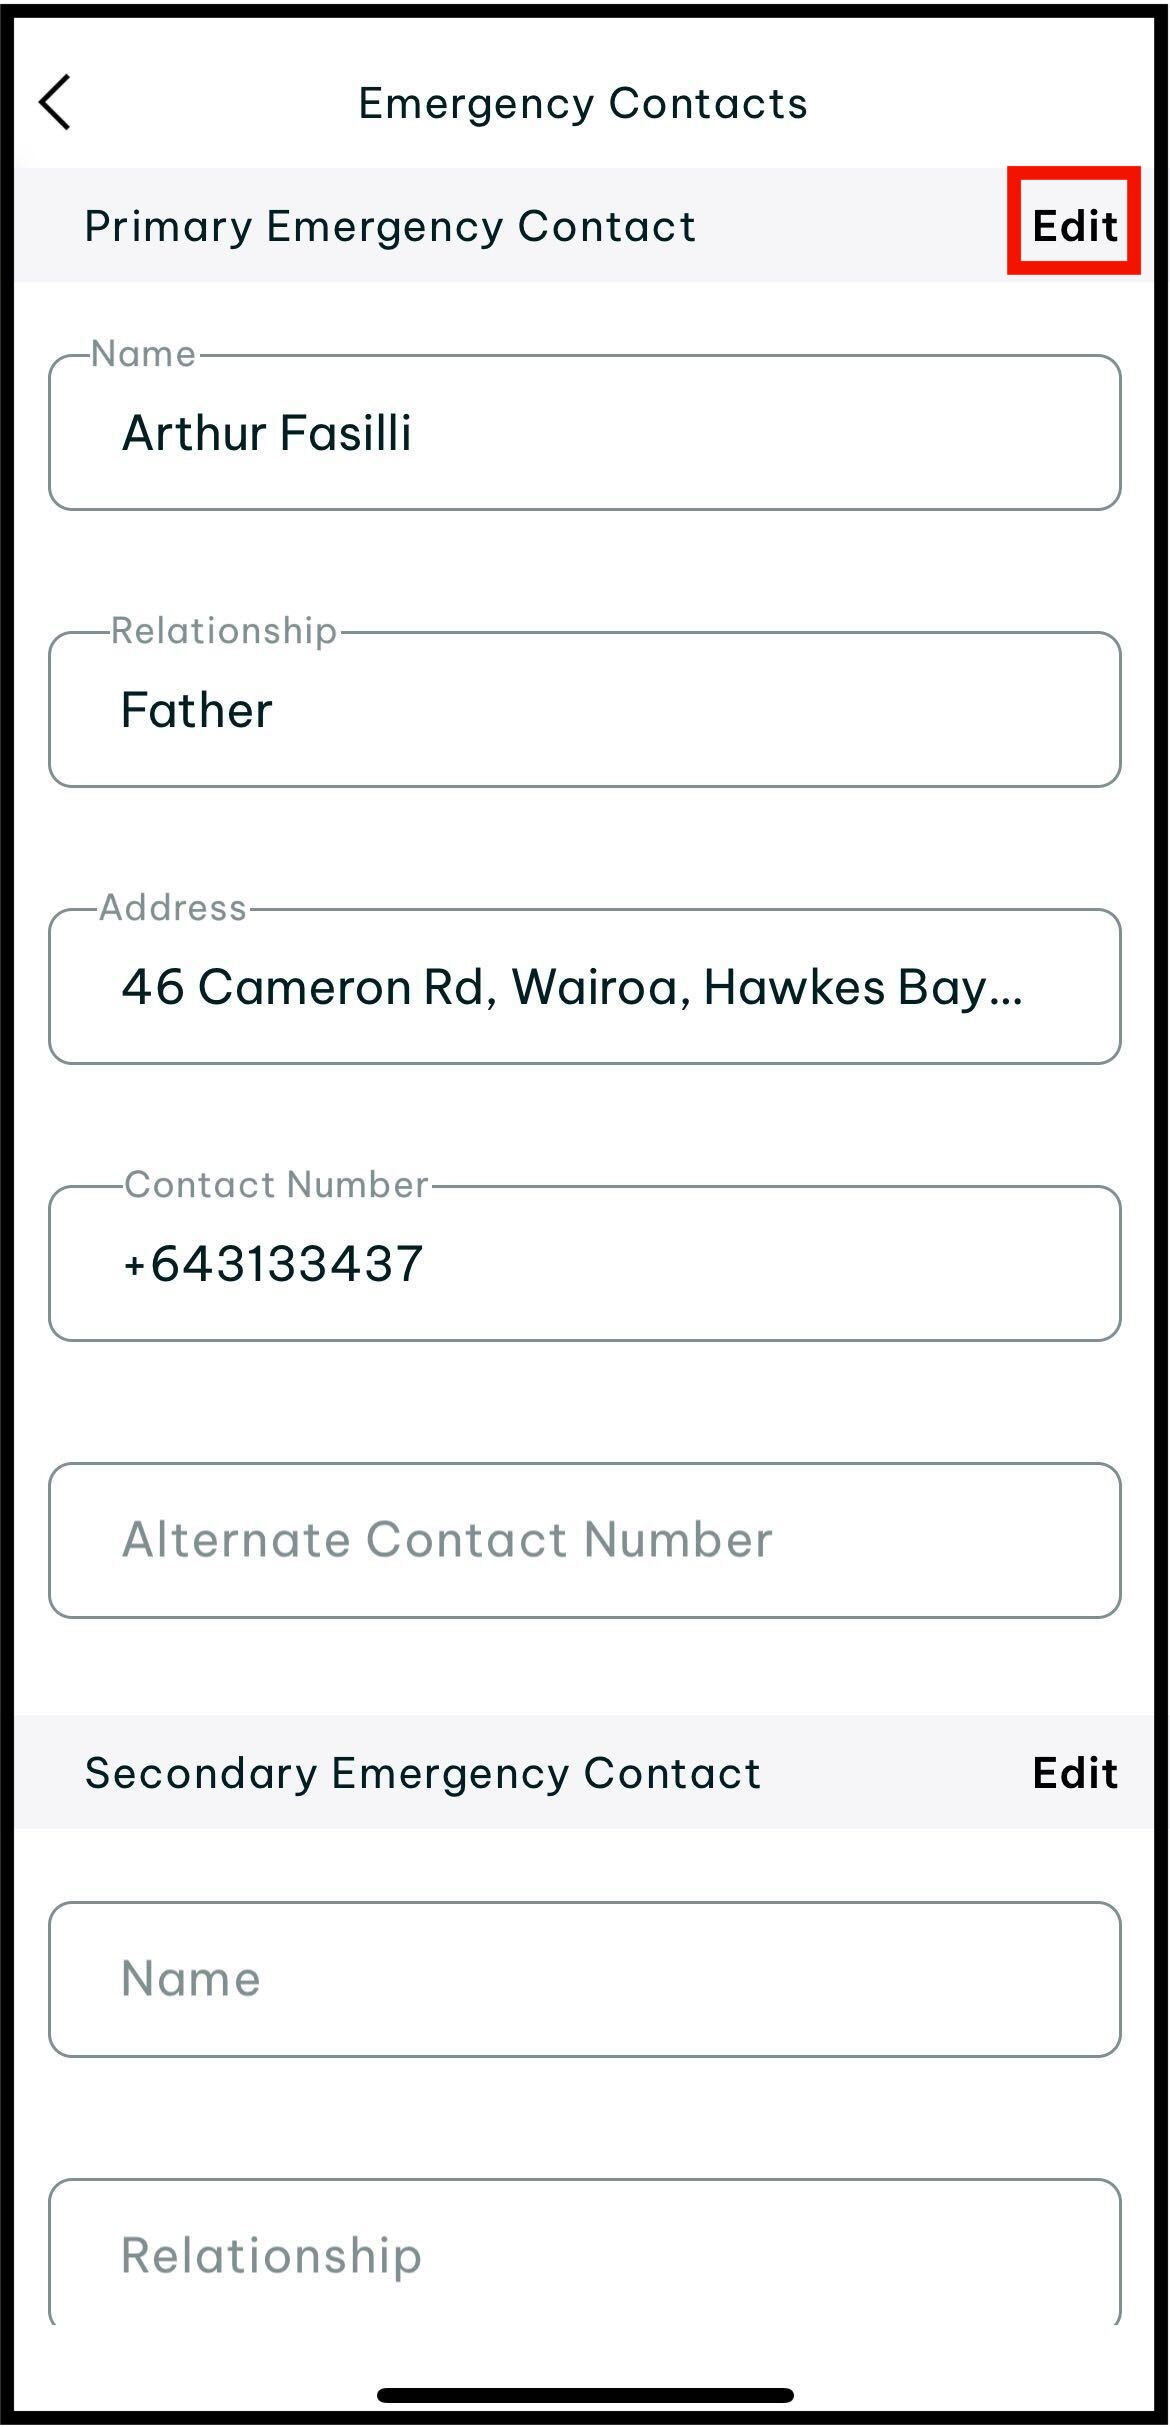 Screenshot of where to view on emergency contacts and where to tap on edit if you wish to add or edit the details